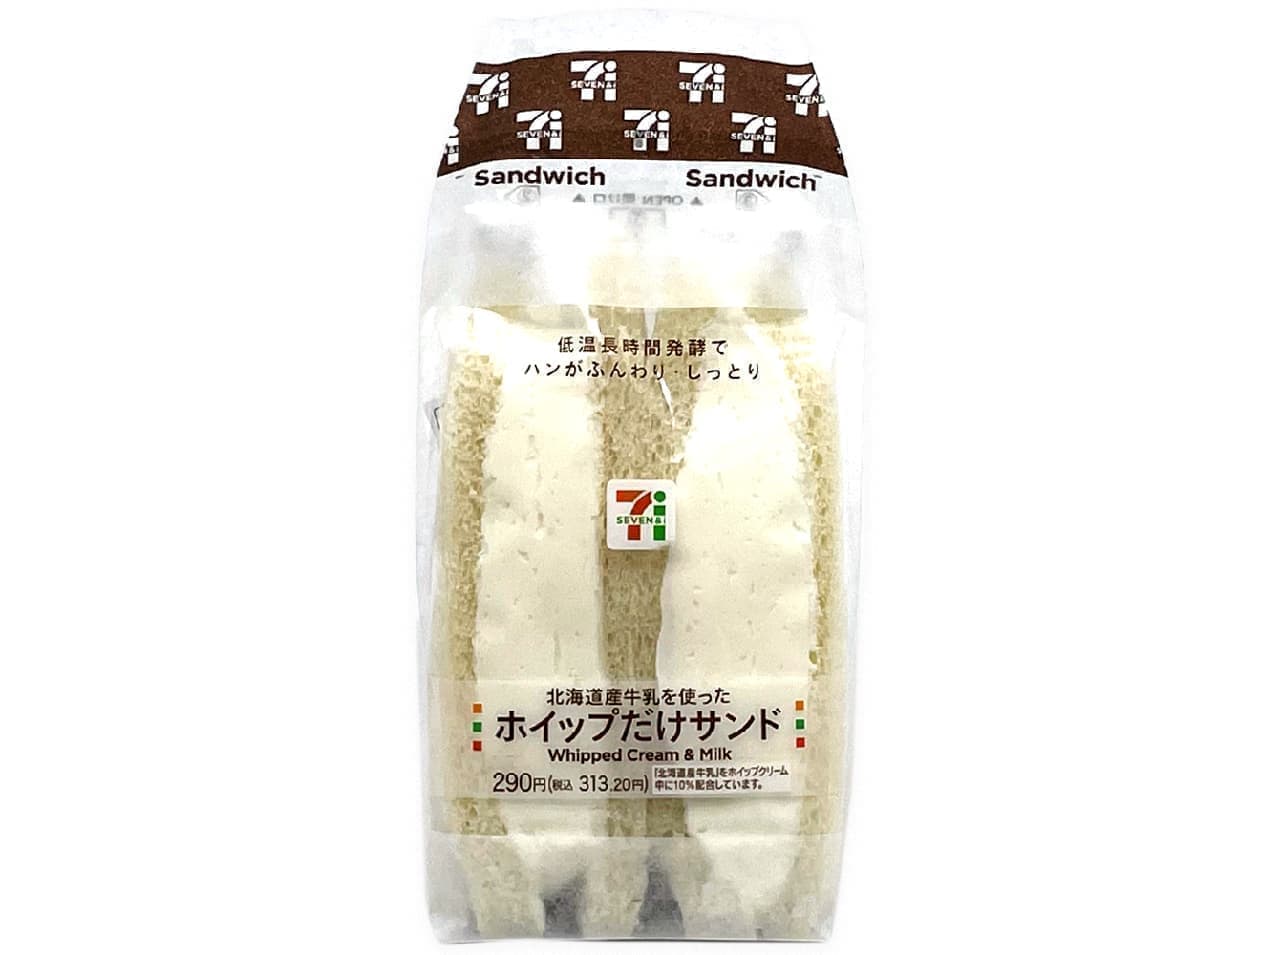 7-ELEVEN "Whipped Only Sandwich with Hokkaido Milk